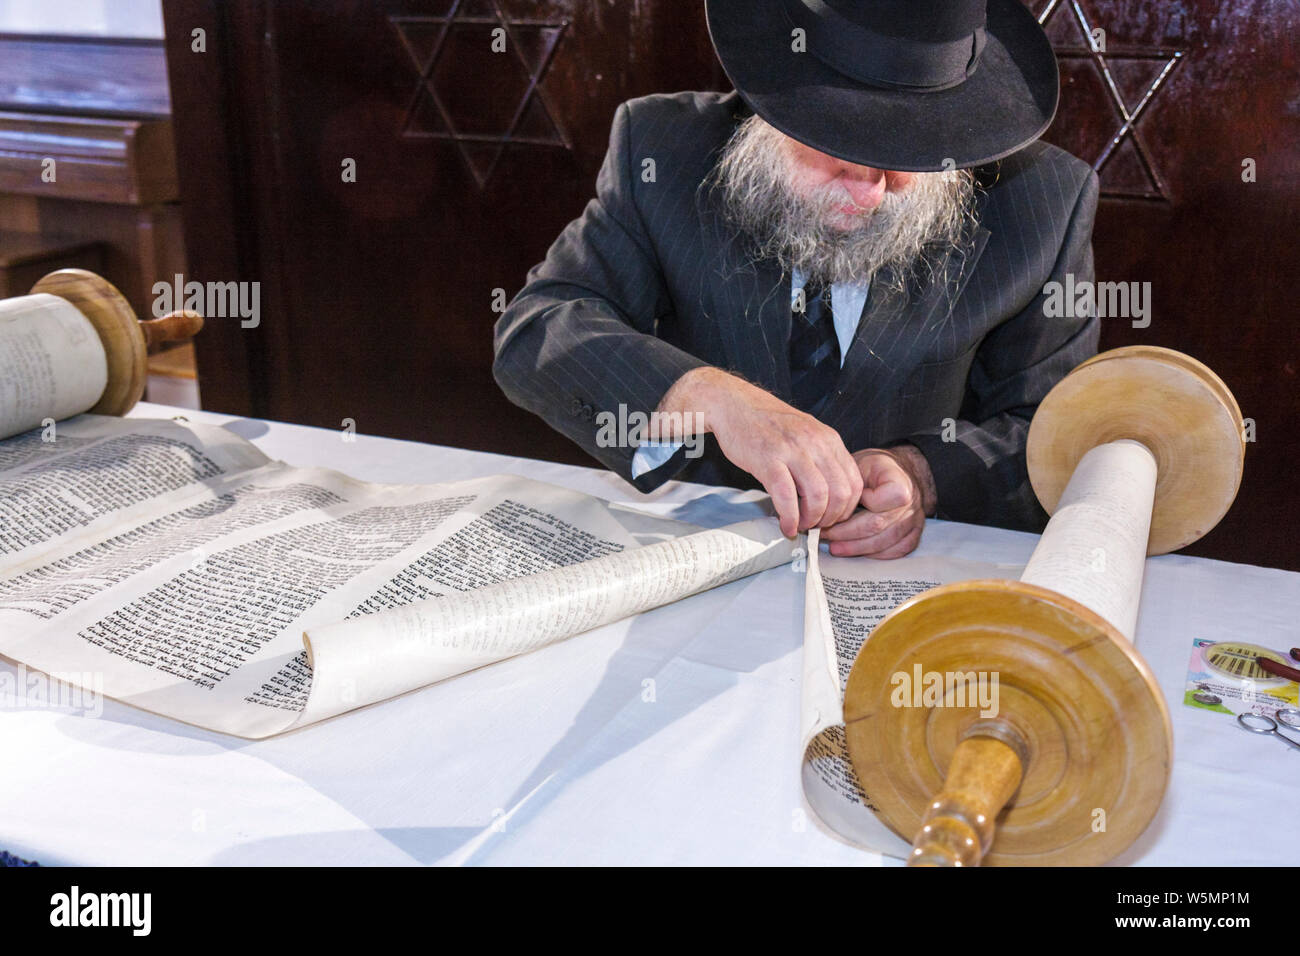 Chabad Lubavitch High Resolution Stock Photography And Images Alamy